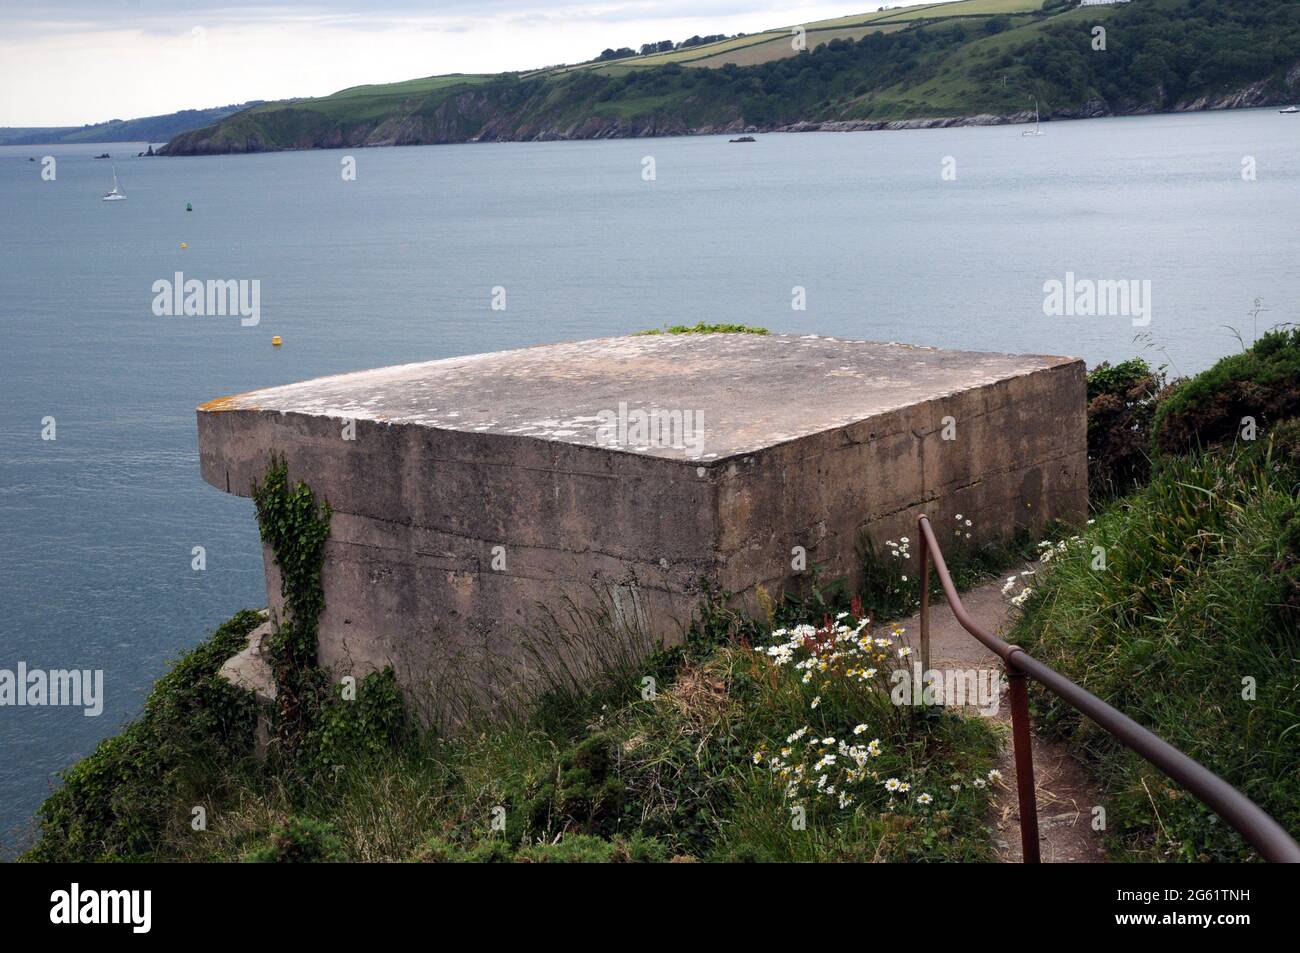 One of the two searchlight positions at Brownstone Battery, a WW2 coastal defence built to protect Dartmouth, the Dart estuary and Start Bay. Stock Photo